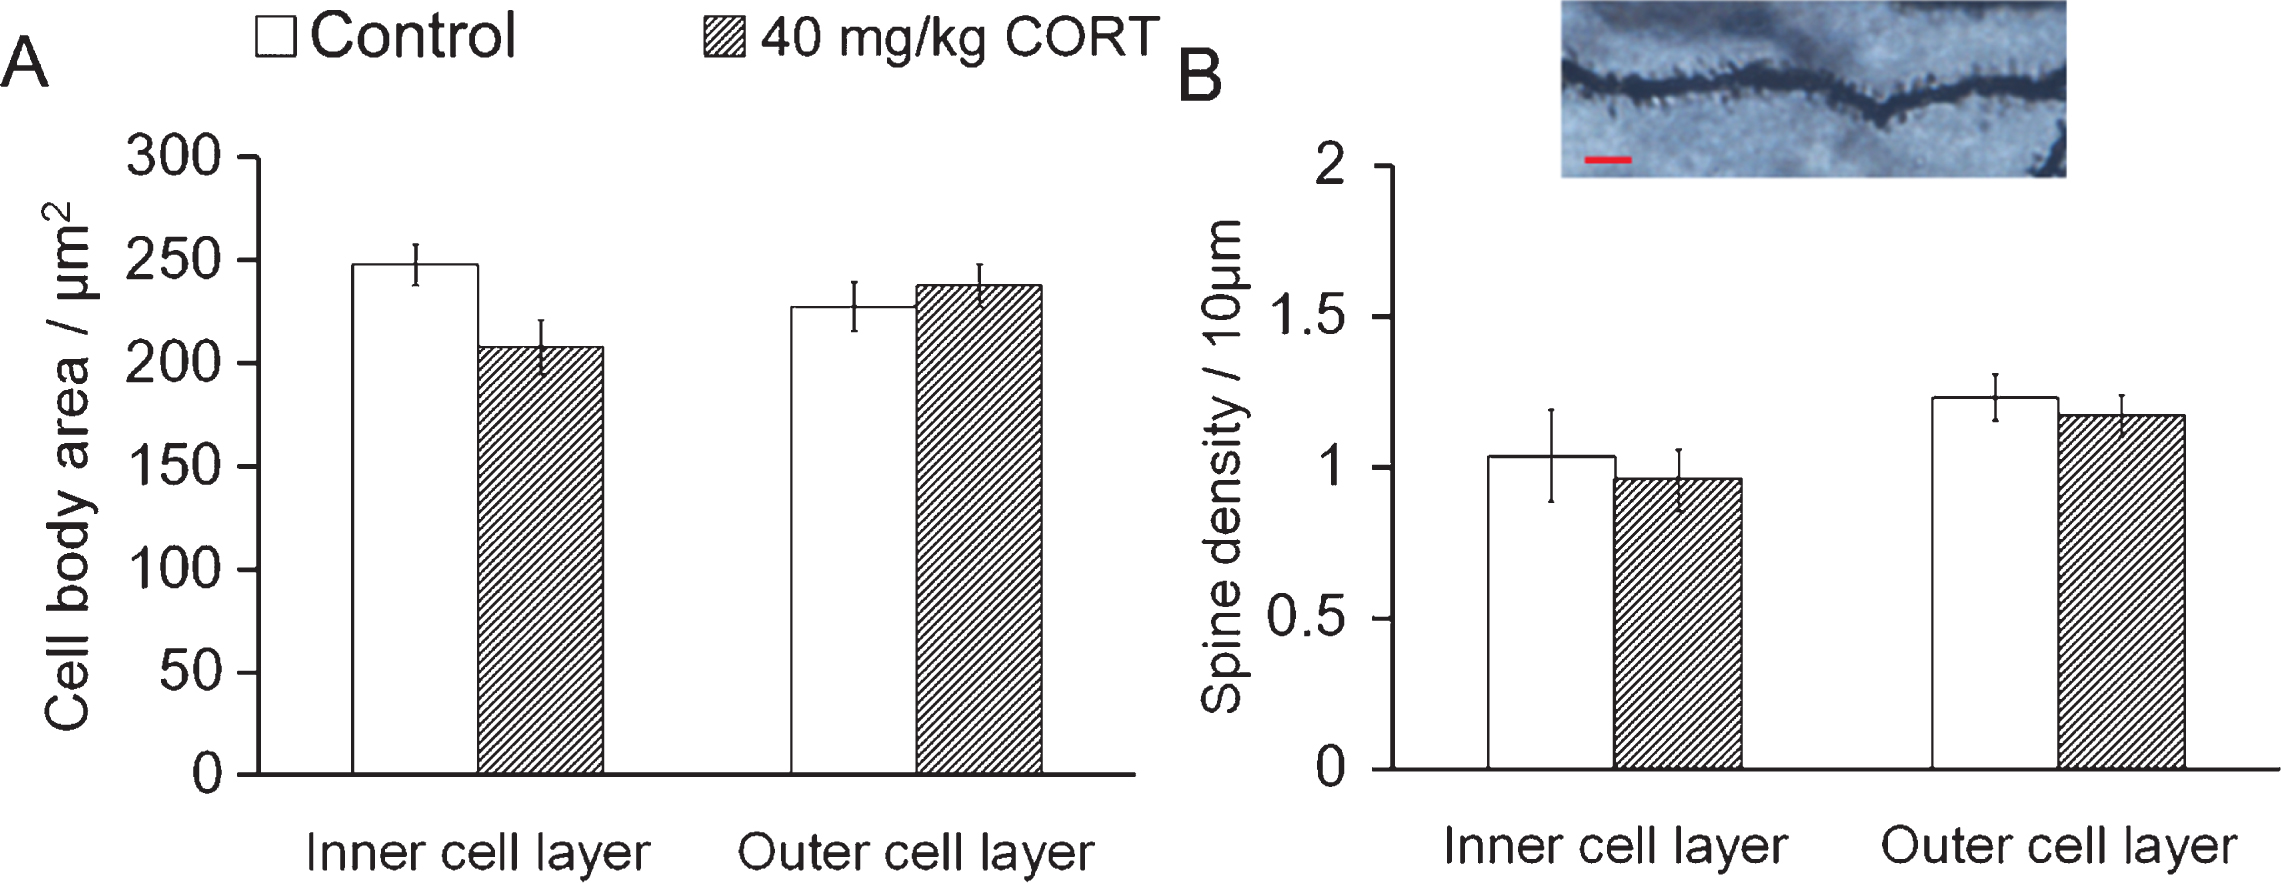 CORT treatment does not affect spine density of neurons in inner and outer cell layers CORT treatment did not affect the soma area. (A) or the spine density (B) in both the inner and the outer cell layers. Scale bar: 20 μm.